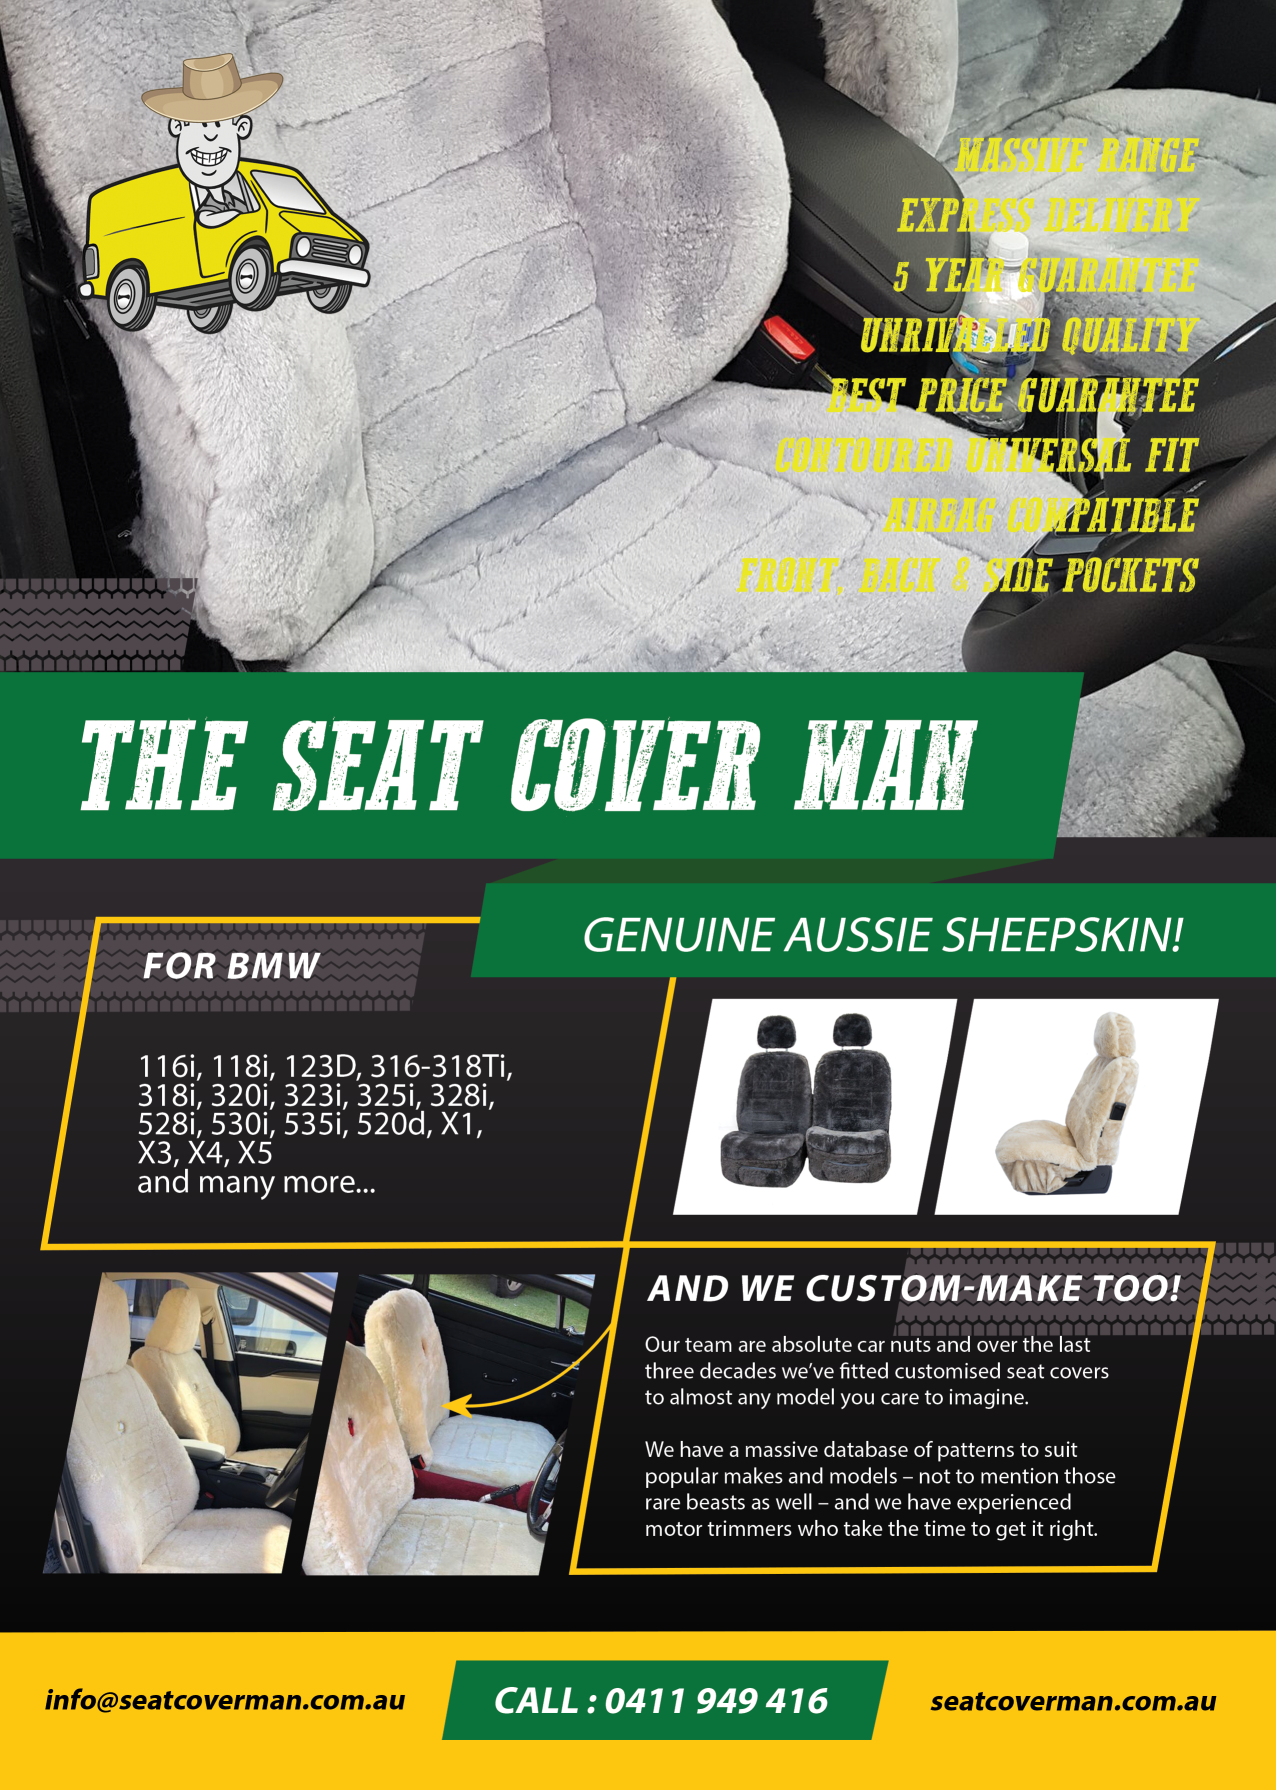 Sheepskin Seat Covers for BMW by The Seat Cover Man